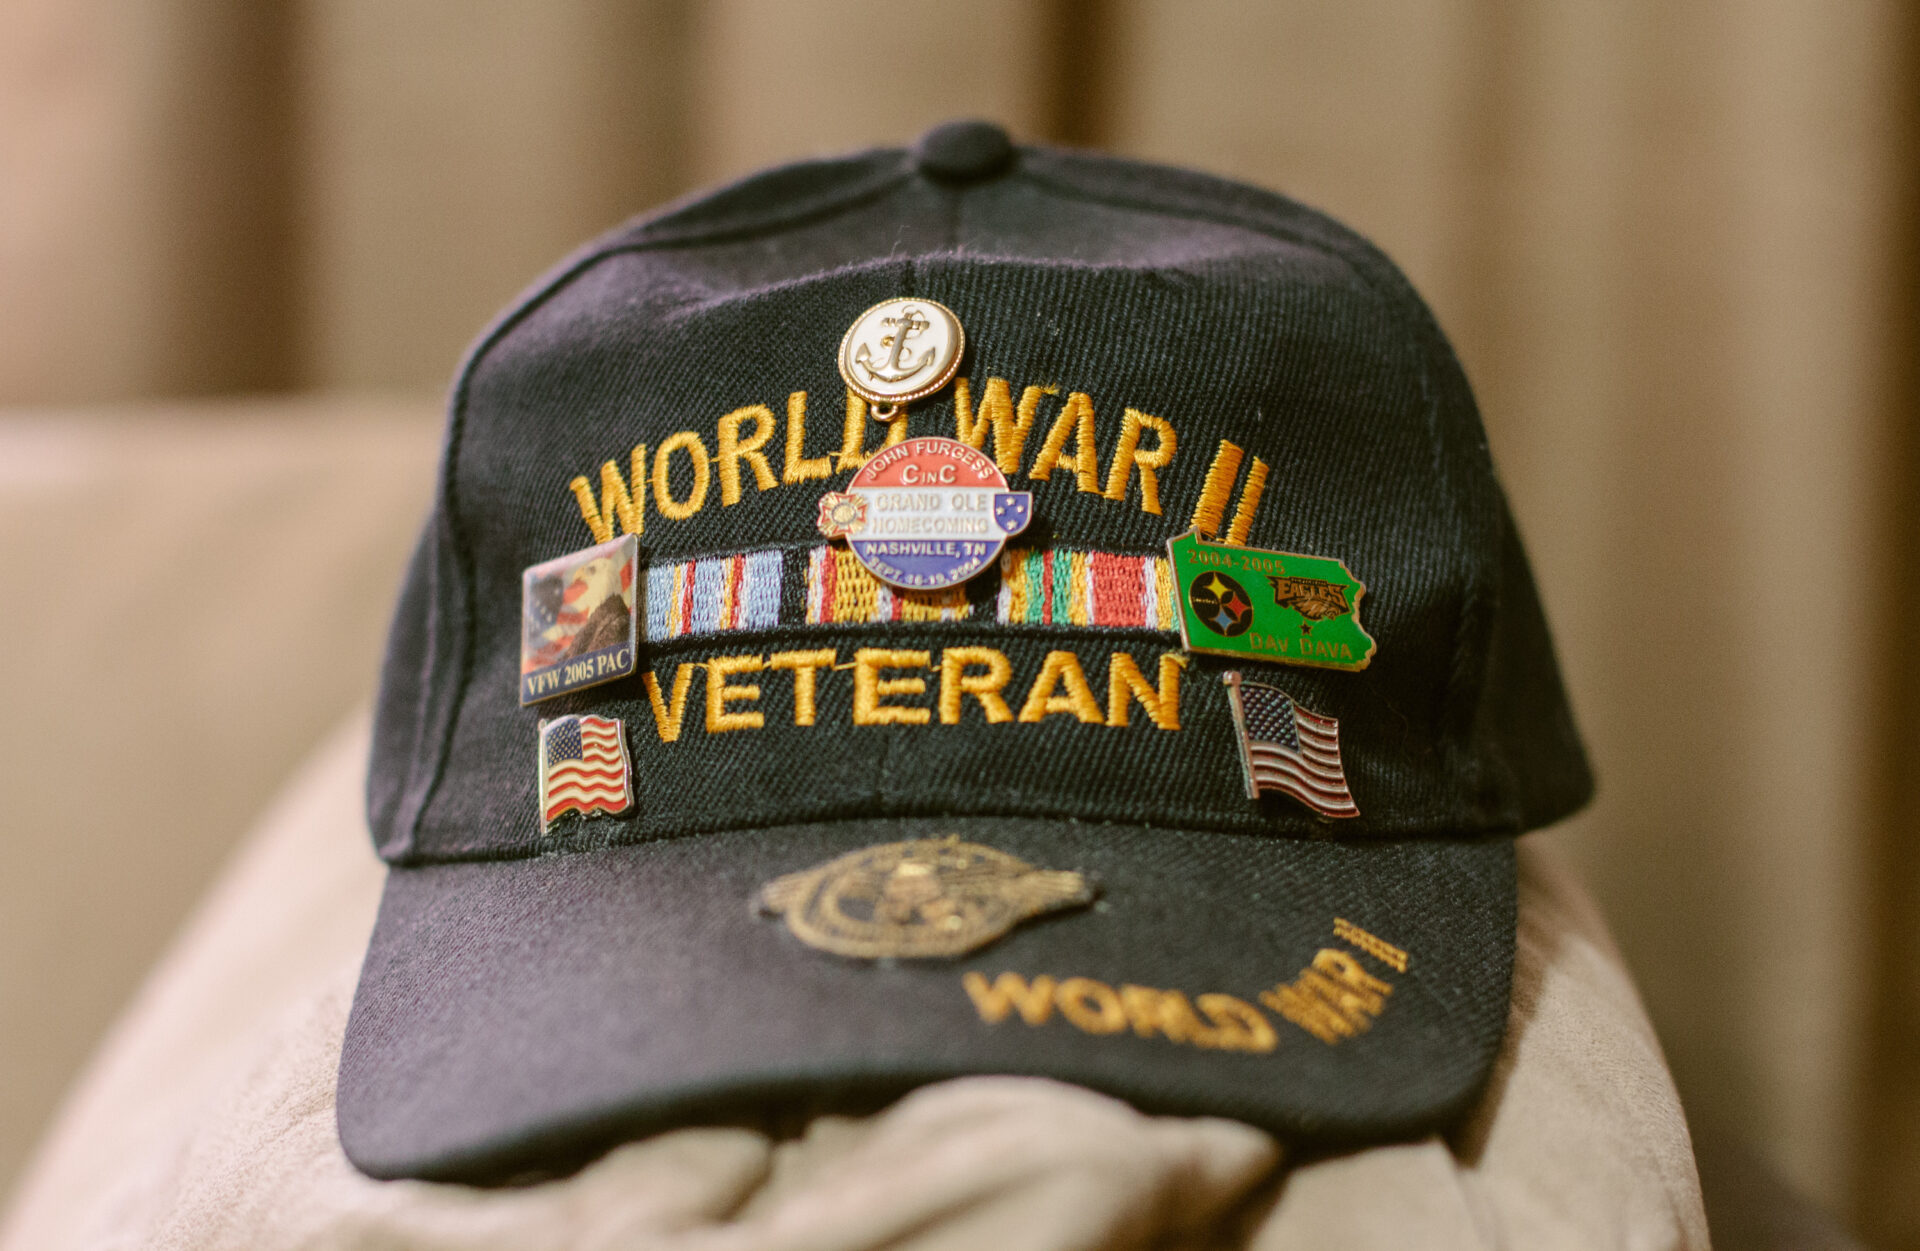 The favorite hat of Harry Bollinger, 88, a World War II Navy veteran who was a participant in secret military experiments that exposed him to mustard gas, causing long-term health problems.